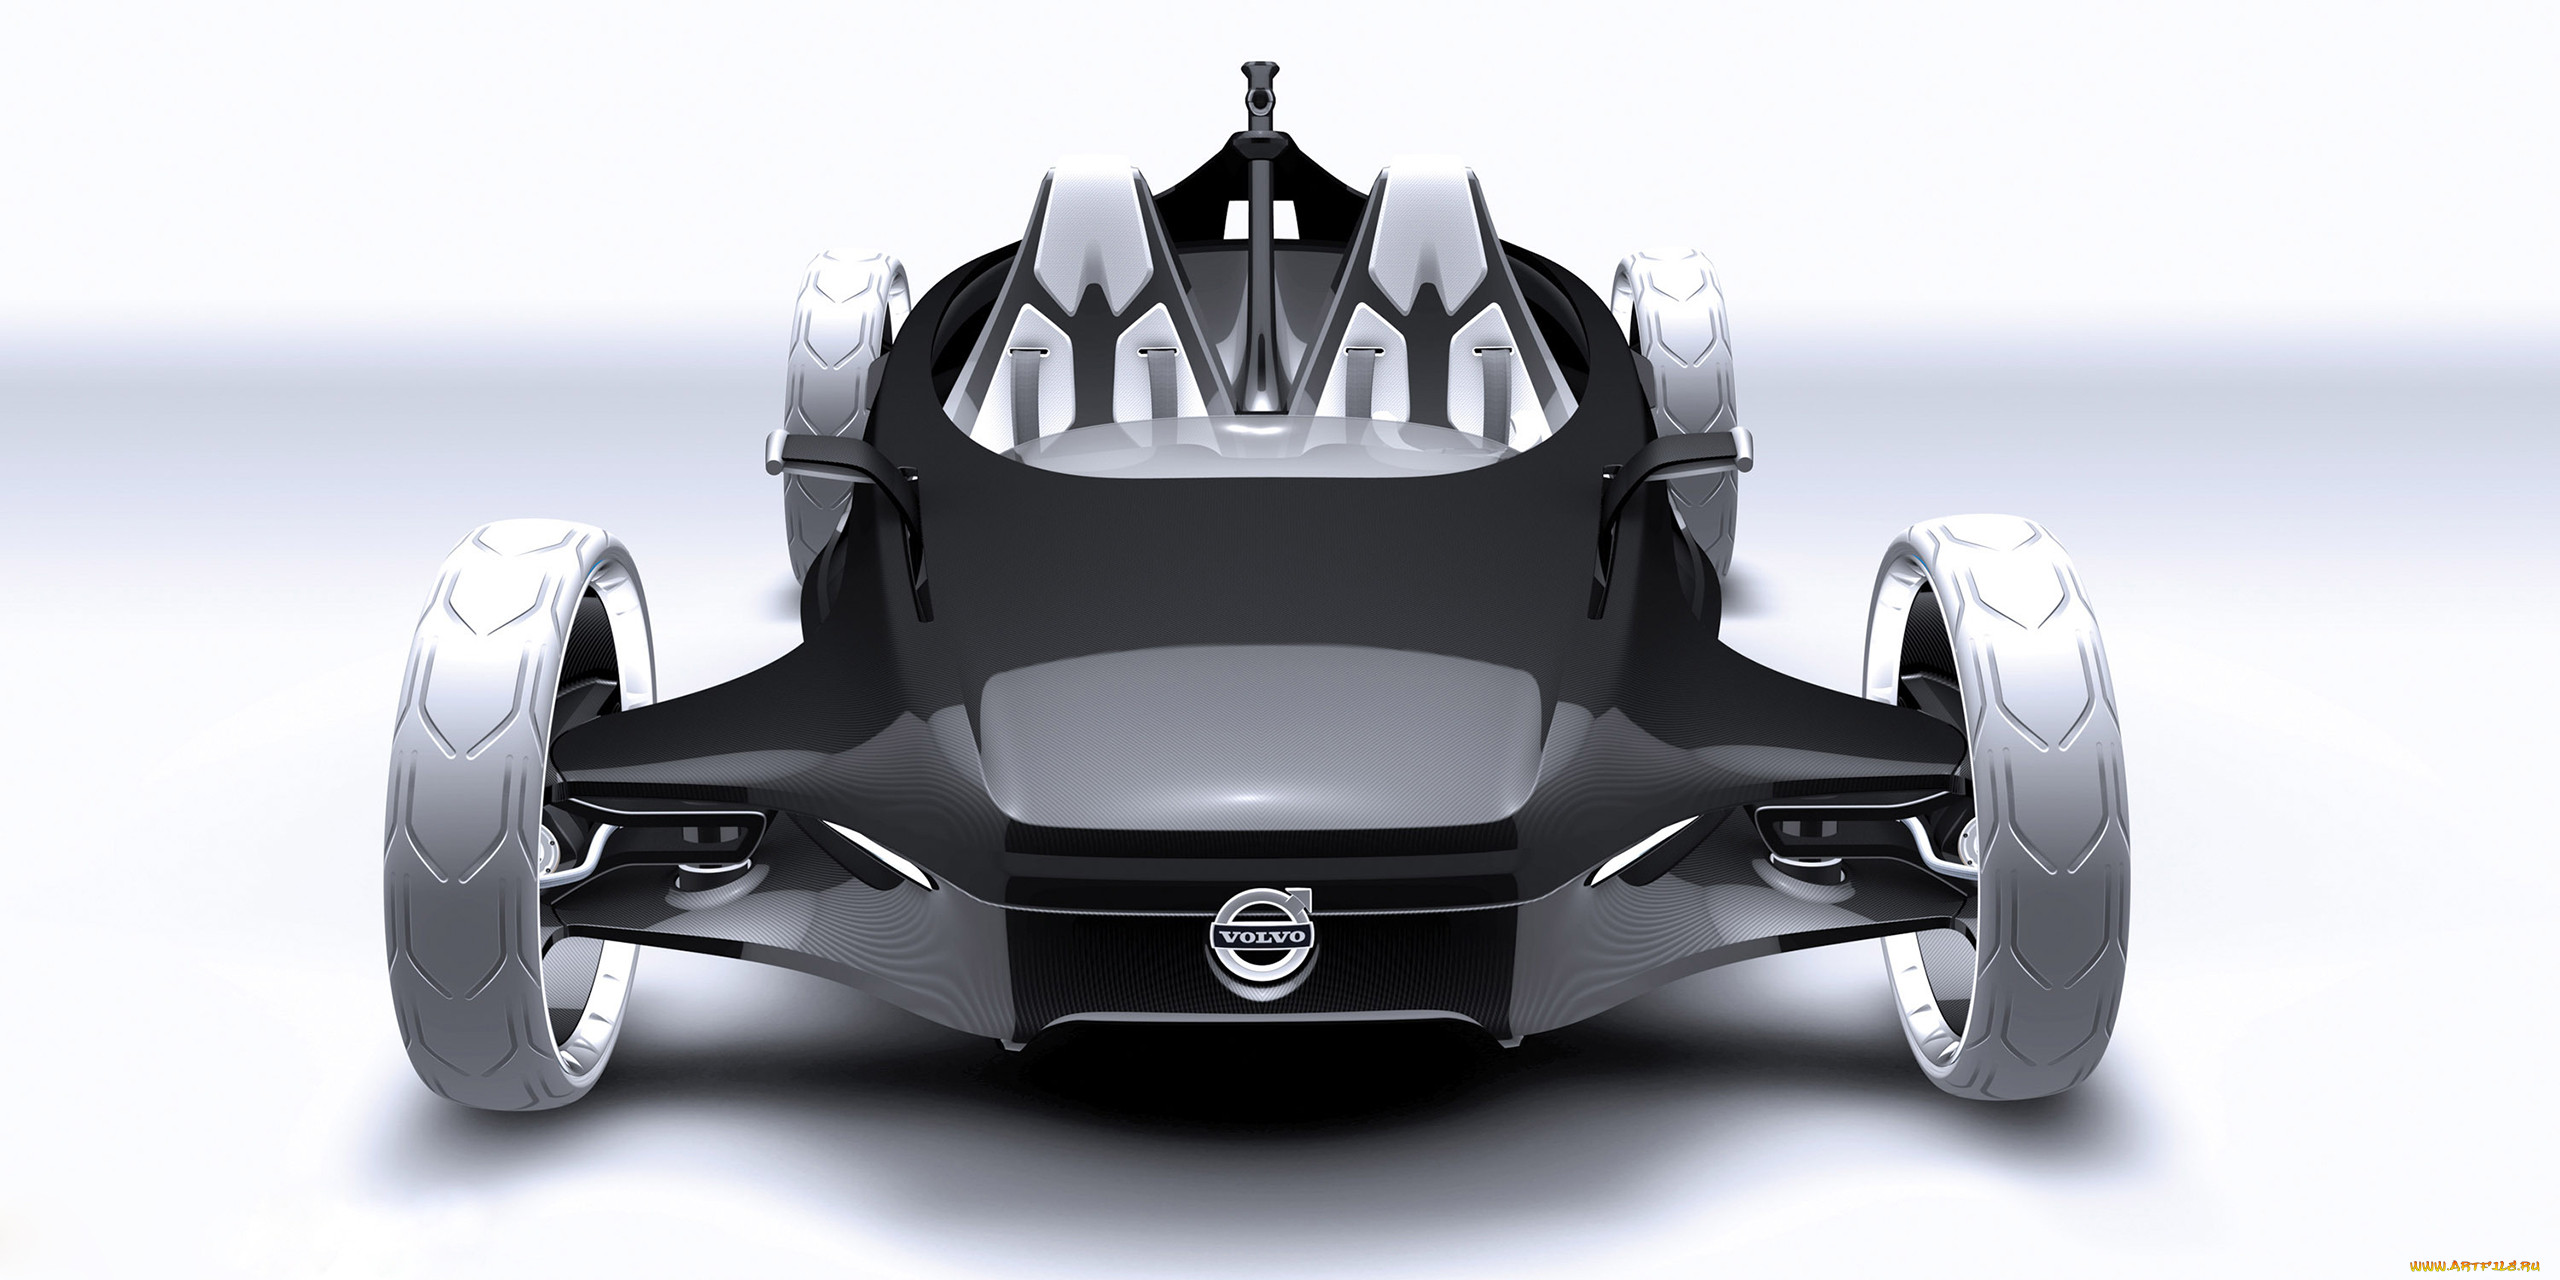 volvo air motion concept 2010, , 3, 2010, concept, air, volvo, motion